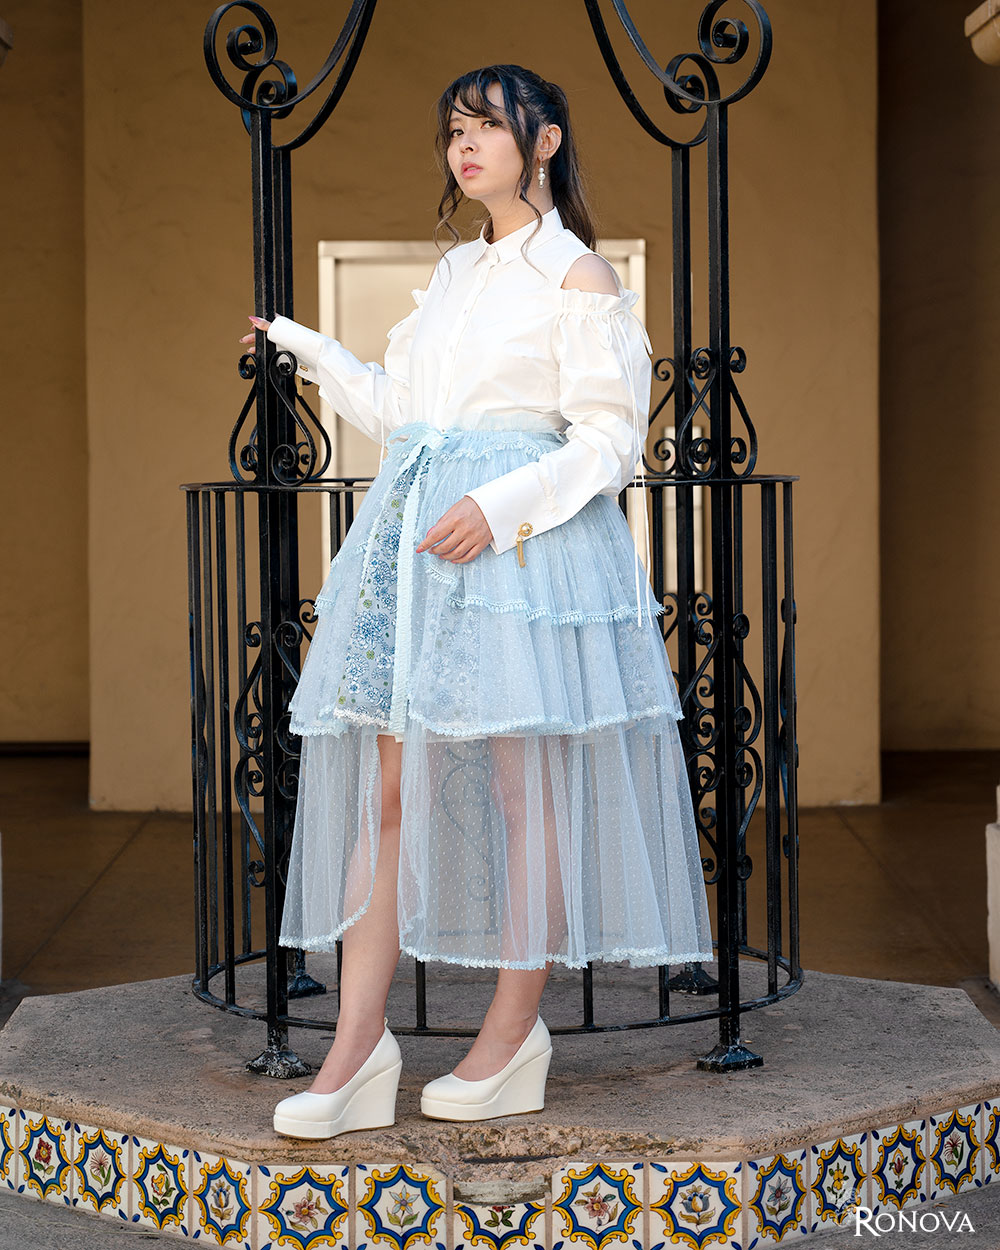 Ronova White Blouse French Cuffs Floral Petticoat Skirt and Ice Blue Overskirt